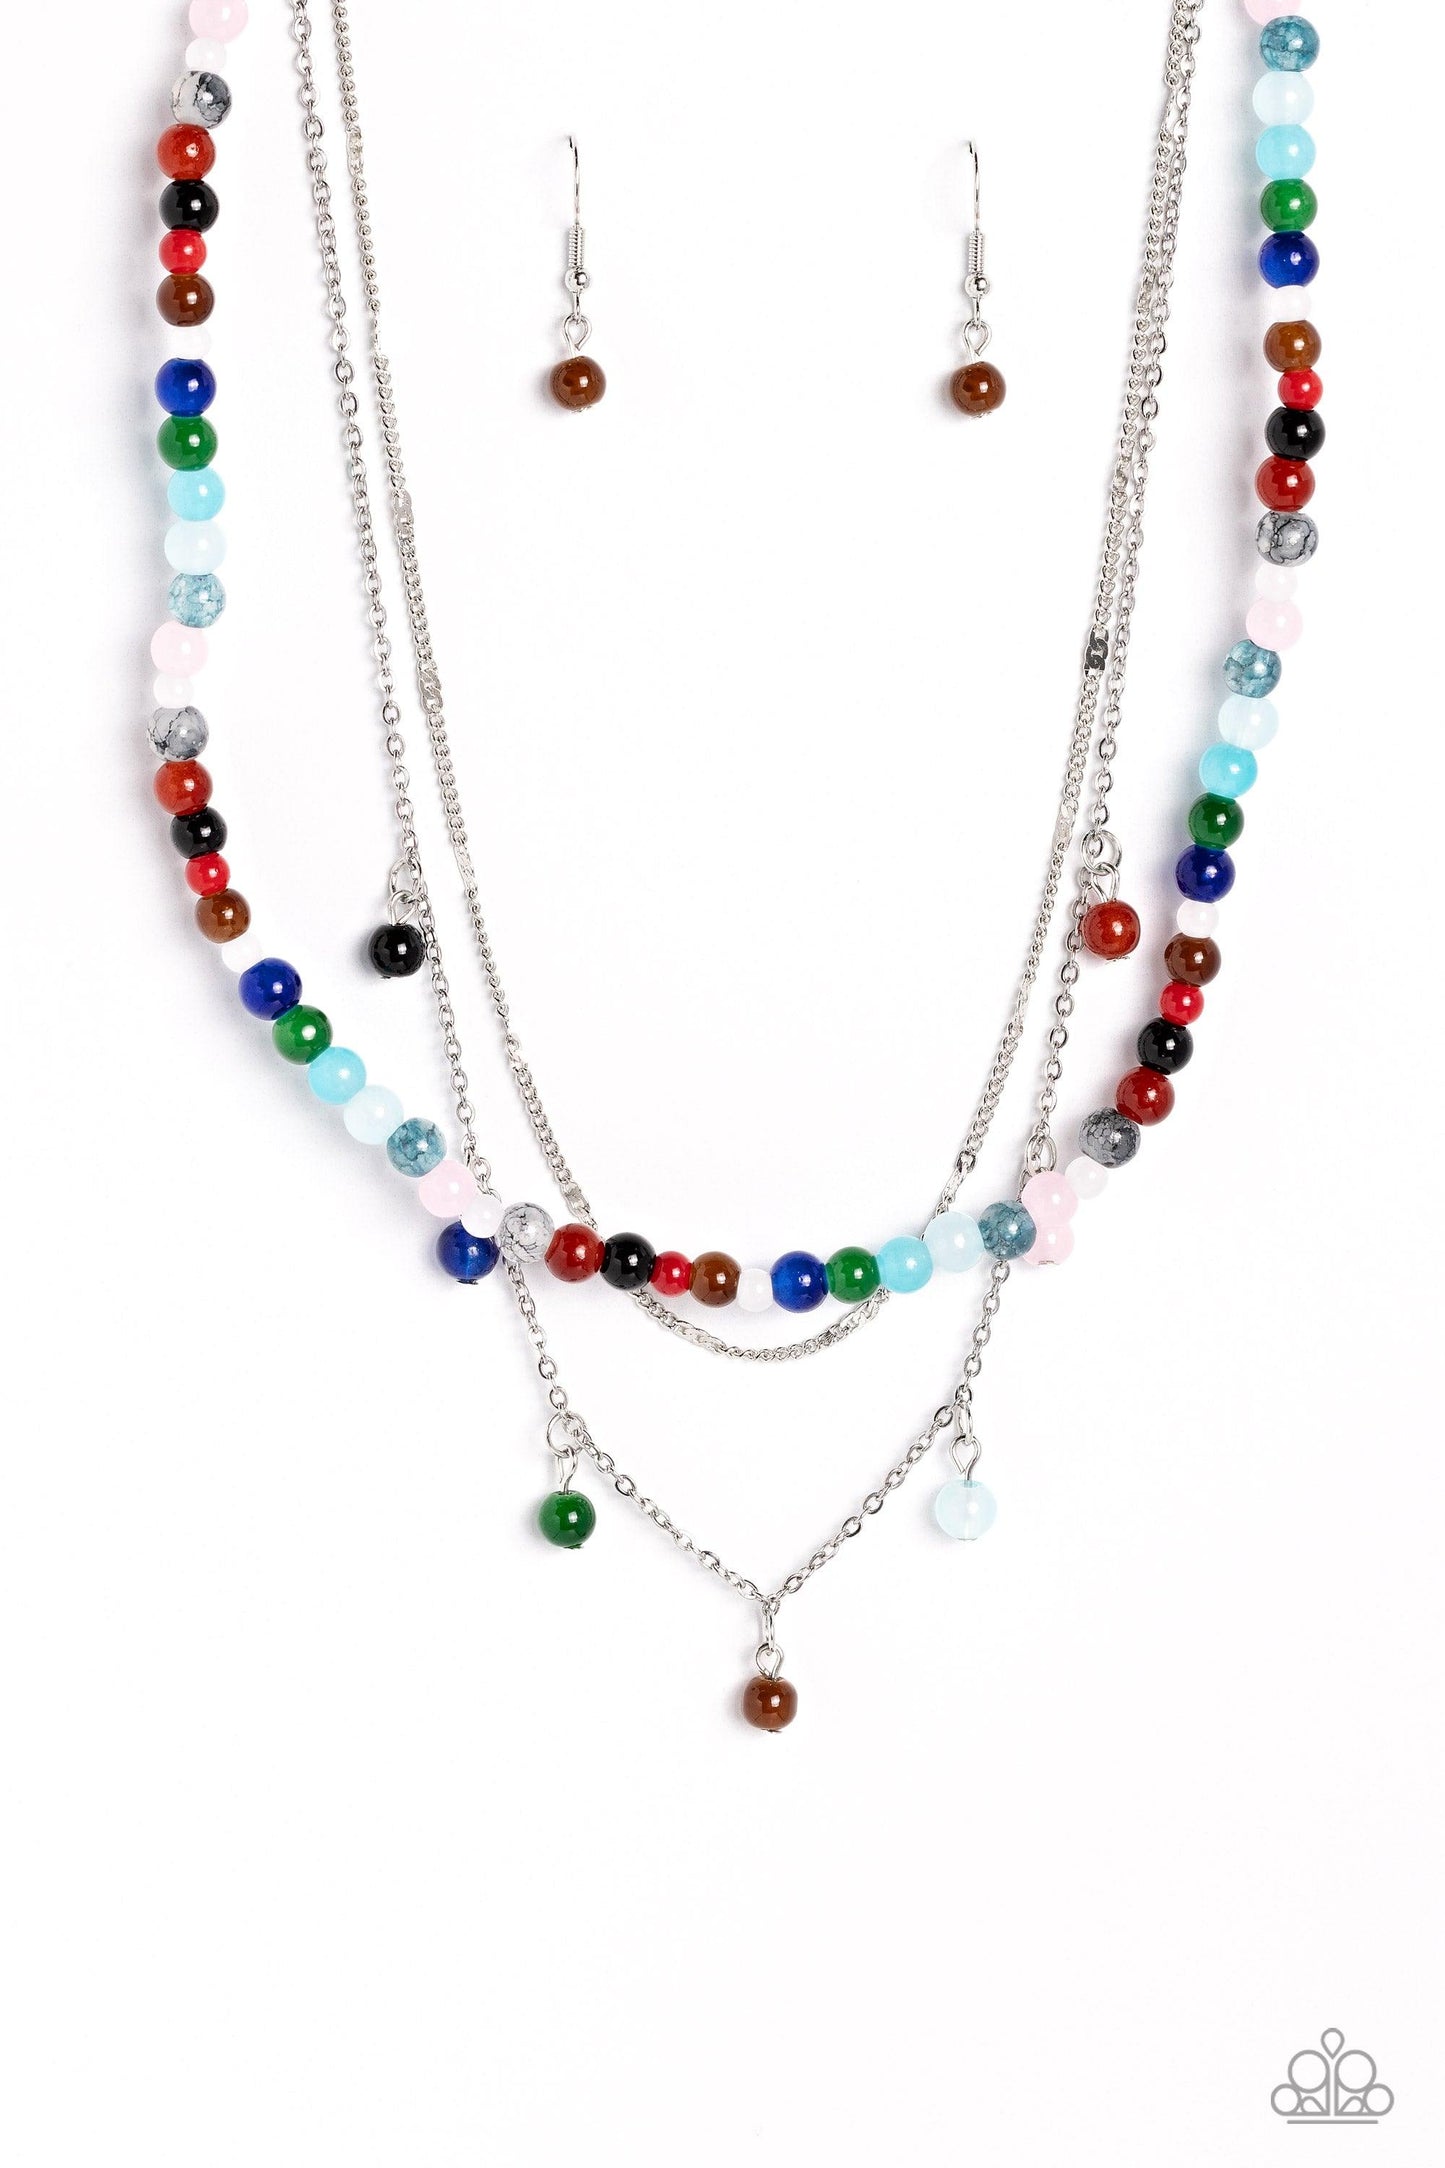 Paparazzi Accessories - BEAD All About It - Multicolor Necklace - Bling by JessieK